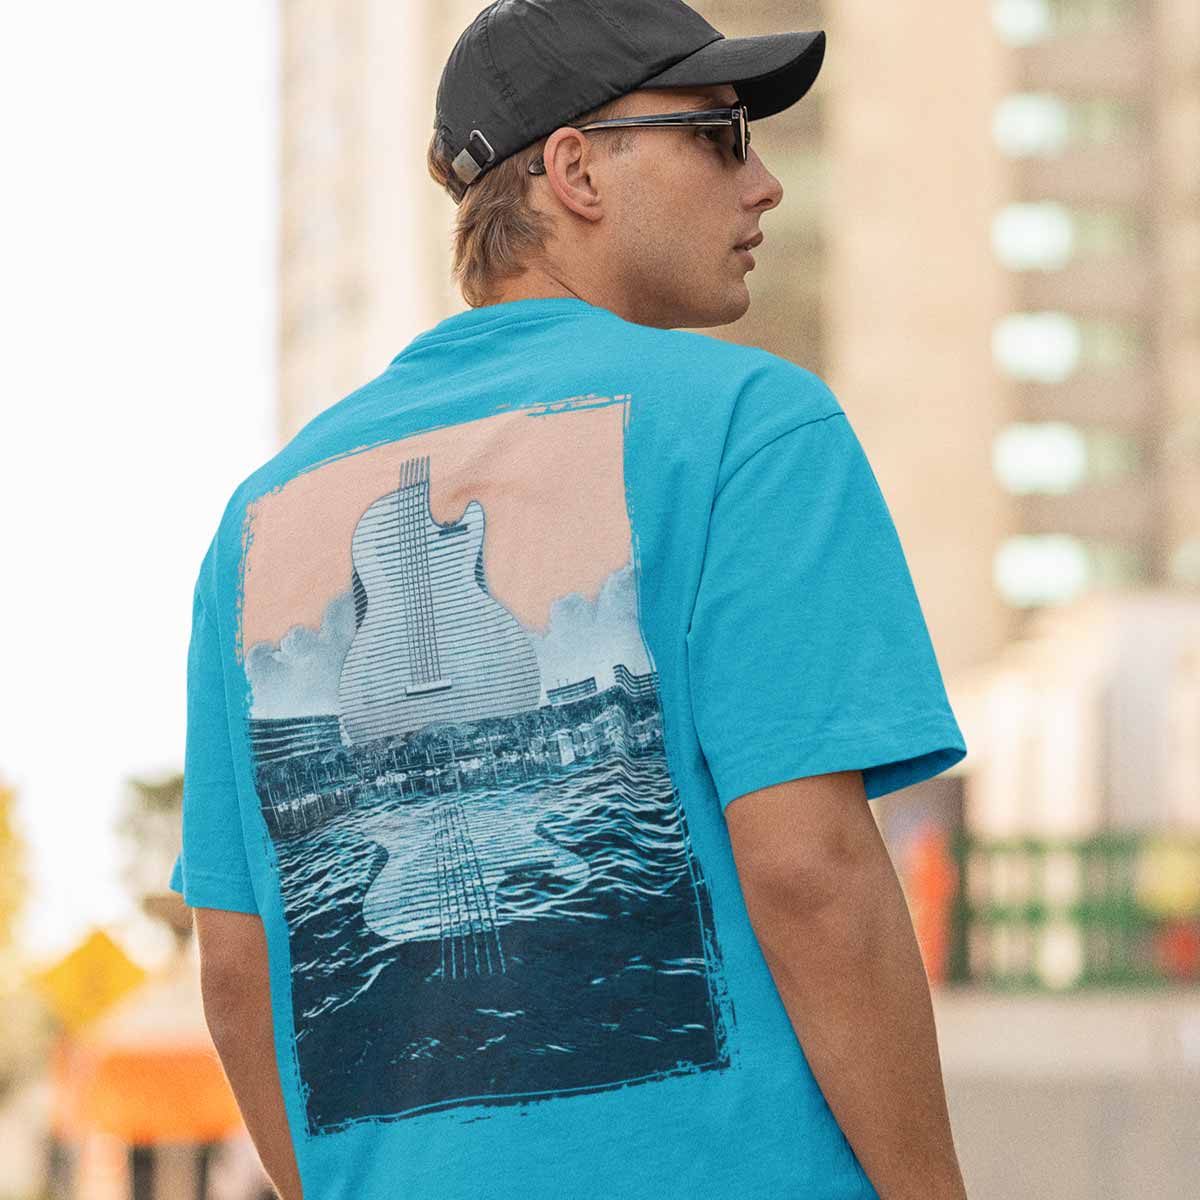 Guitar Hotel Adult Fit Tee in Aqua with Reflection Design image number 4